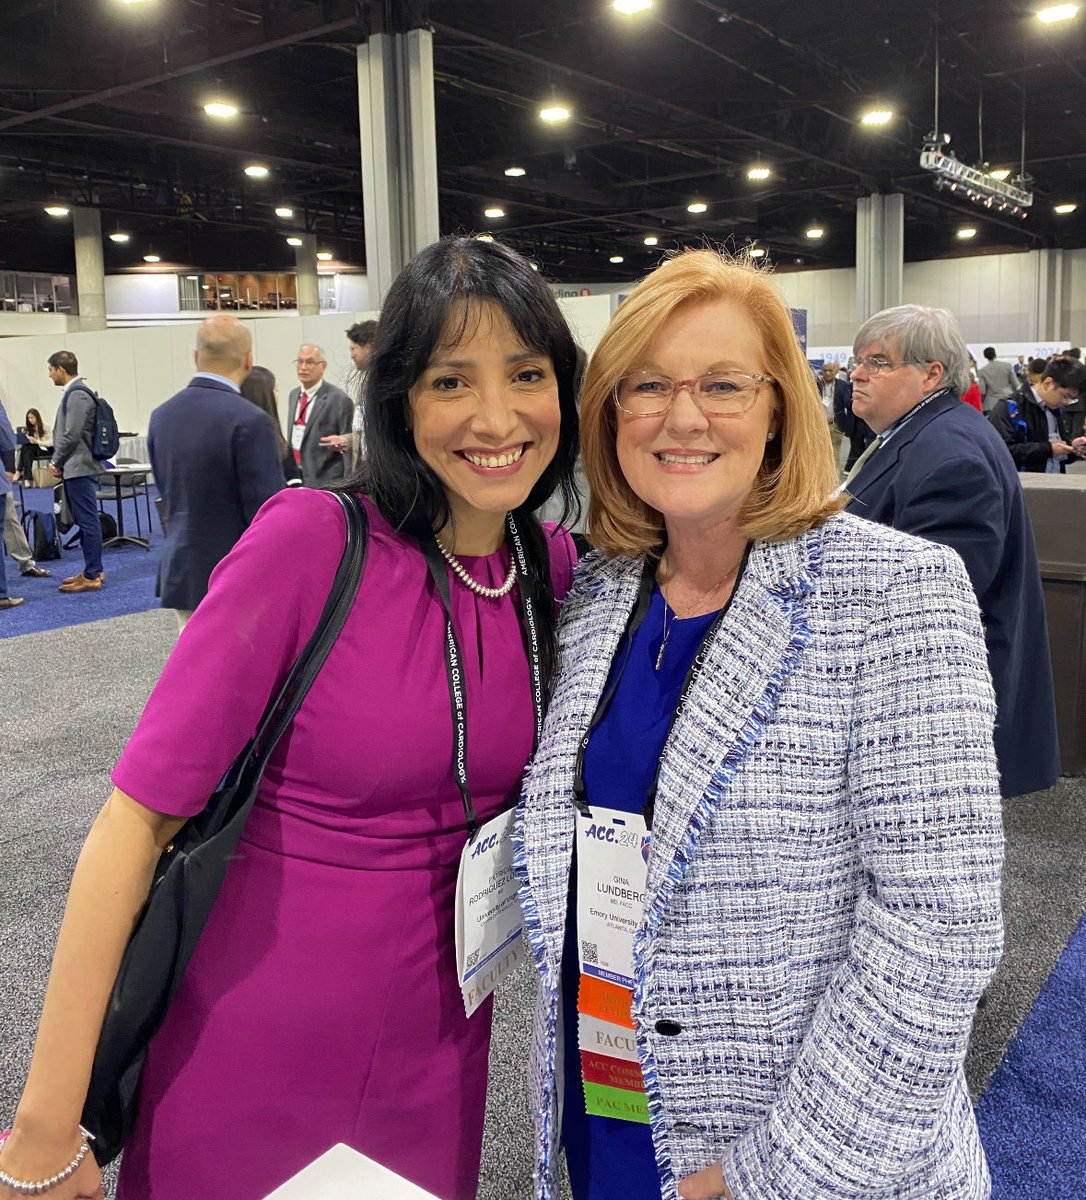 Best of #ACC24 is catching up with amazing leaders and mentors! Thank you ⁦@gina_lundberg⁩ #ACCWIC ⁦@ACCinTouch⁩